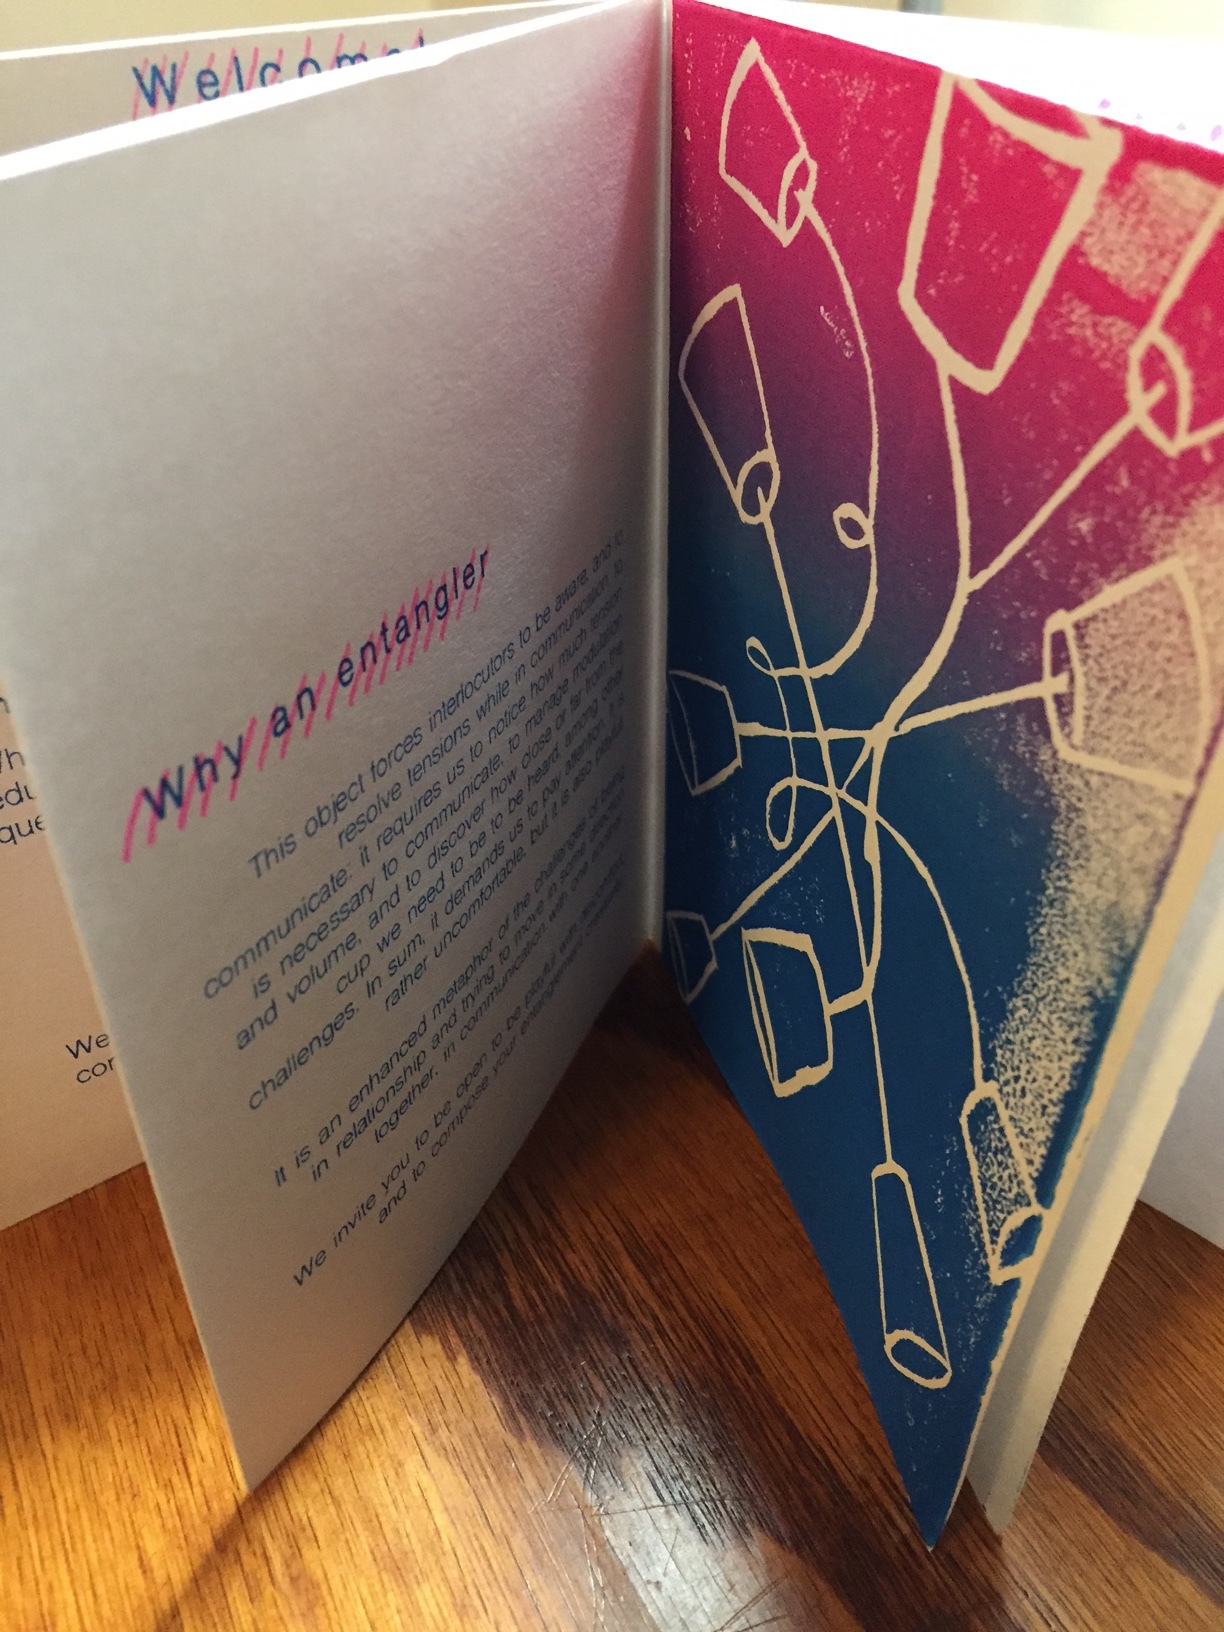 Booklet for "Walk-me-through", May 2018